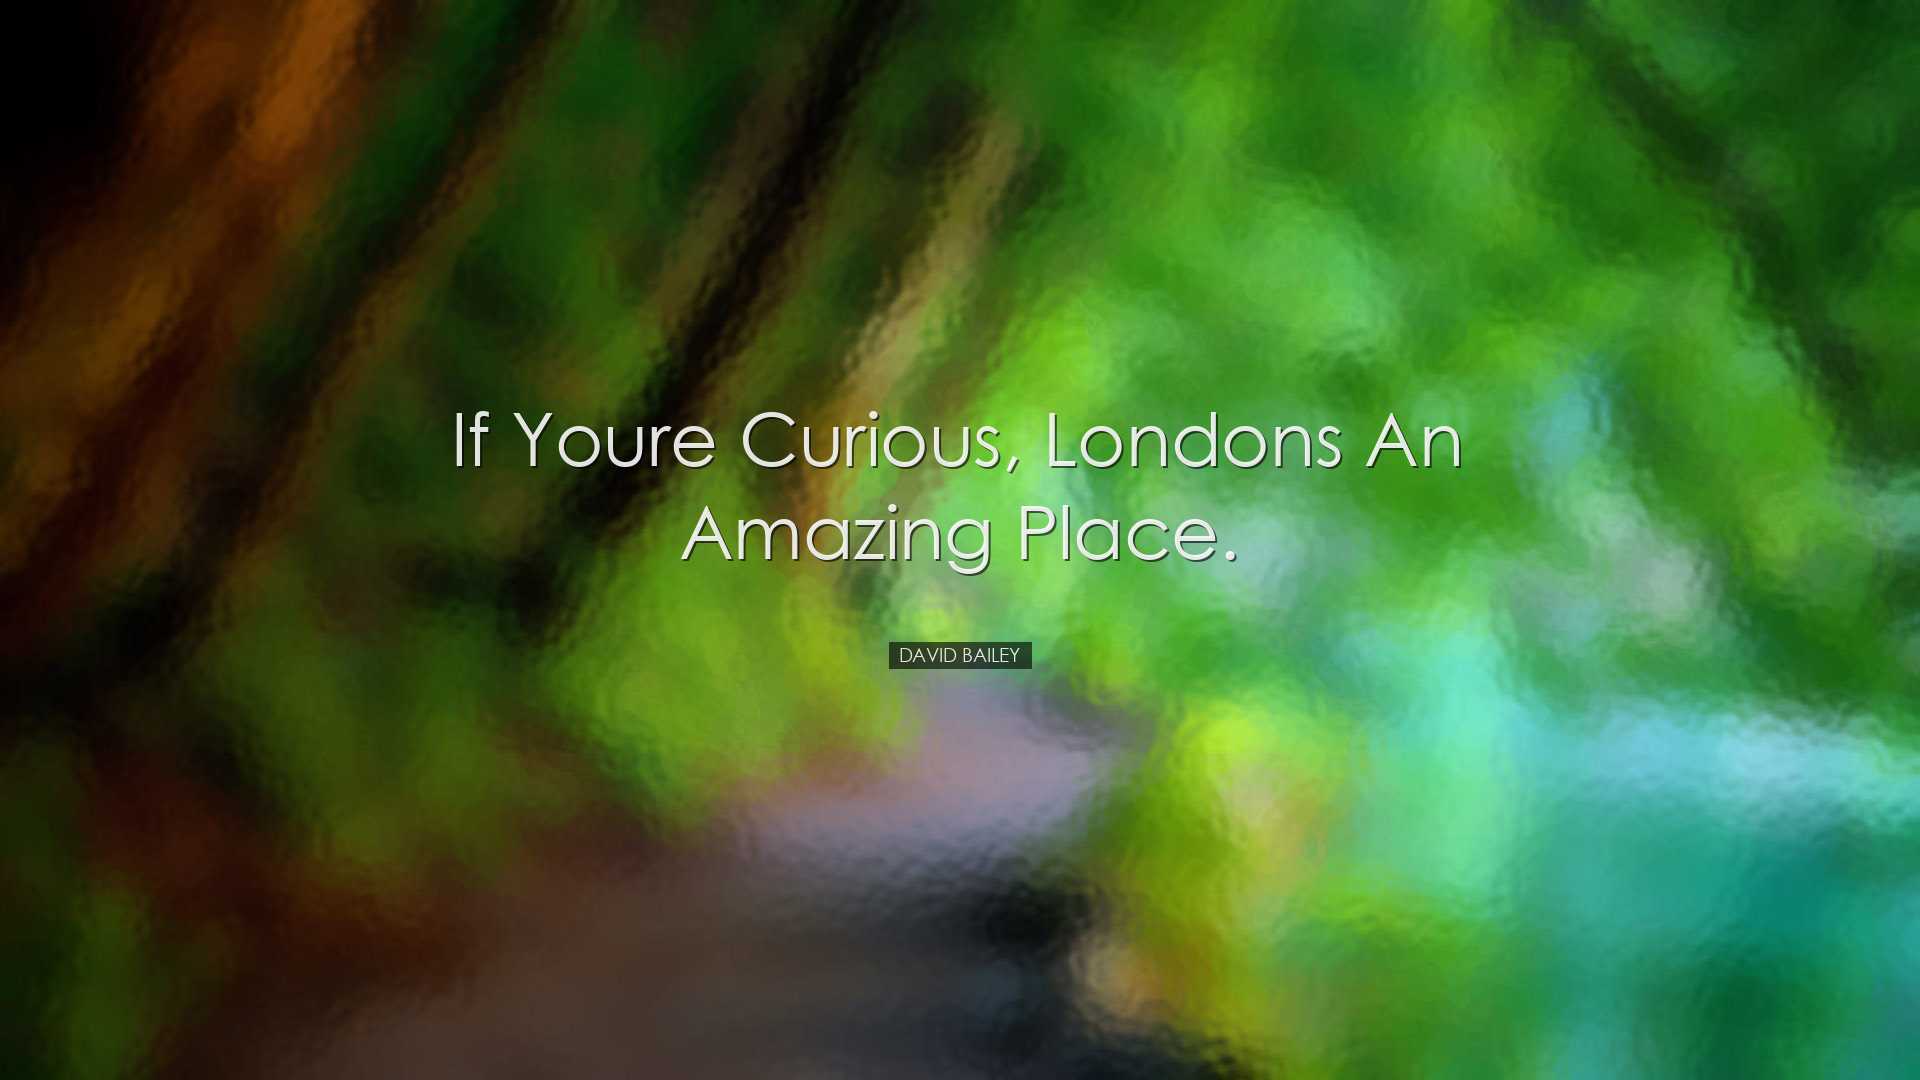 If youre curious, Londons an amazing place. - David Bailey